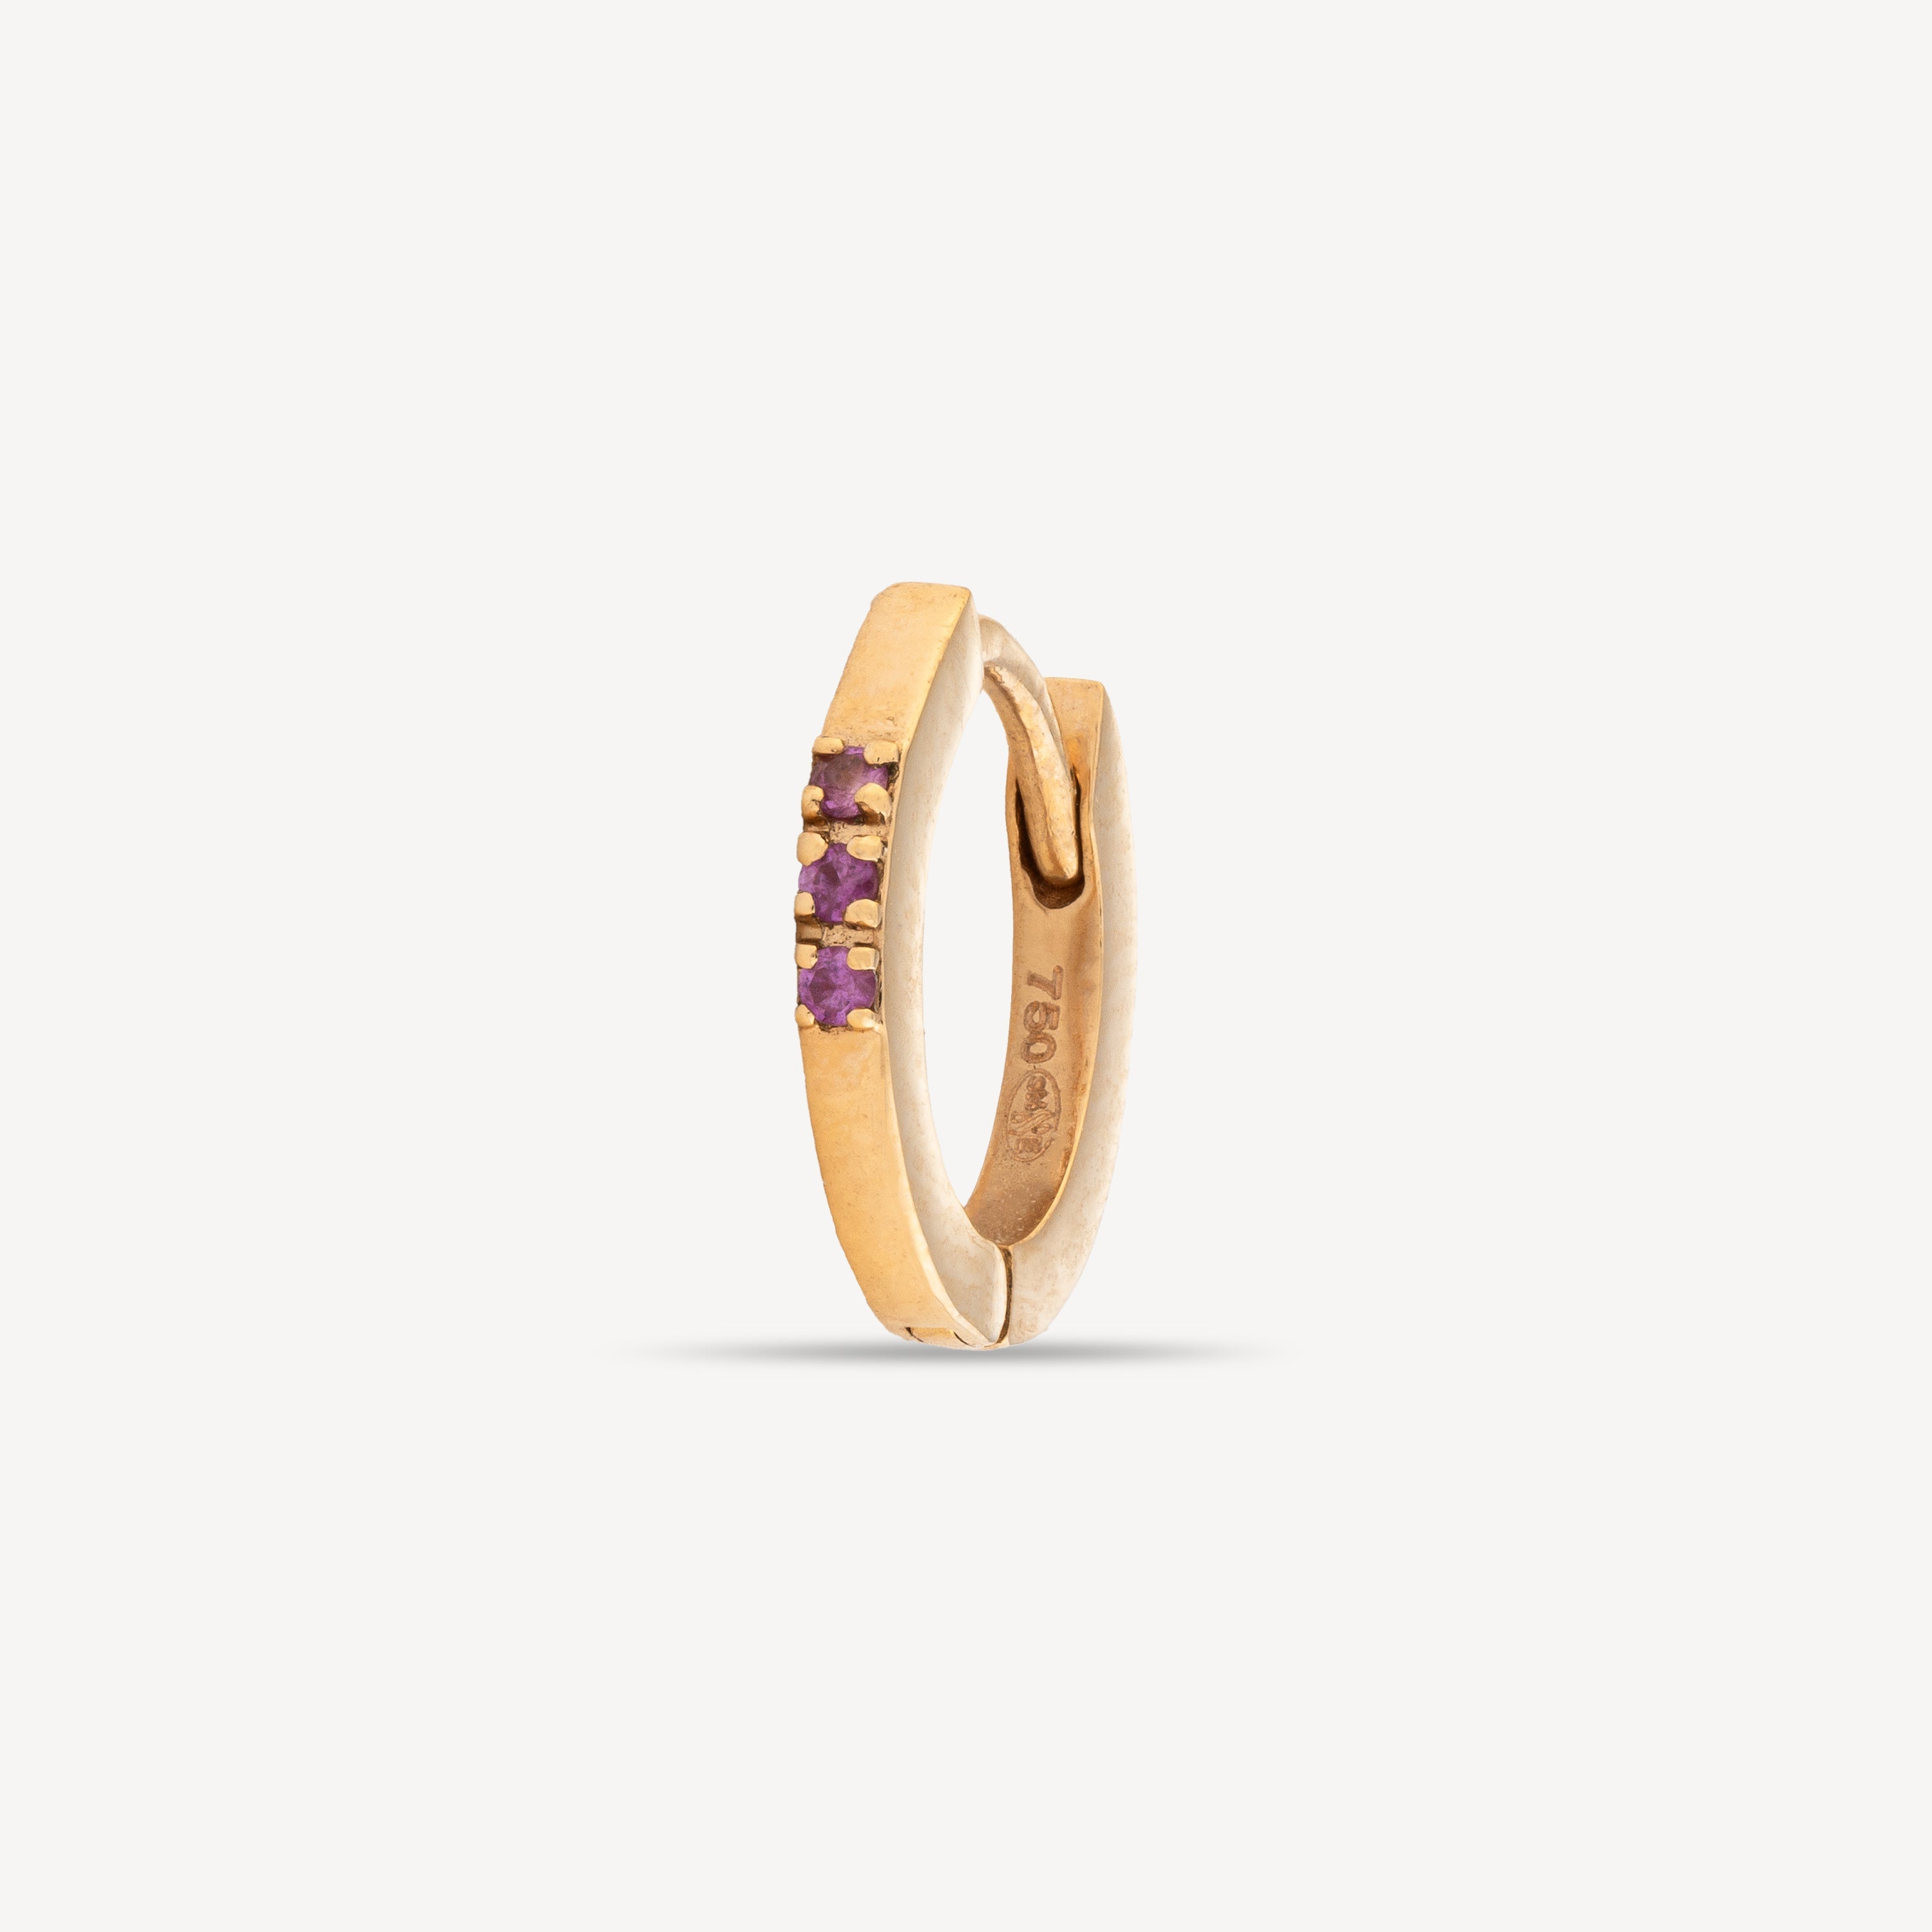 Creole 3 pink sapphires rose gold